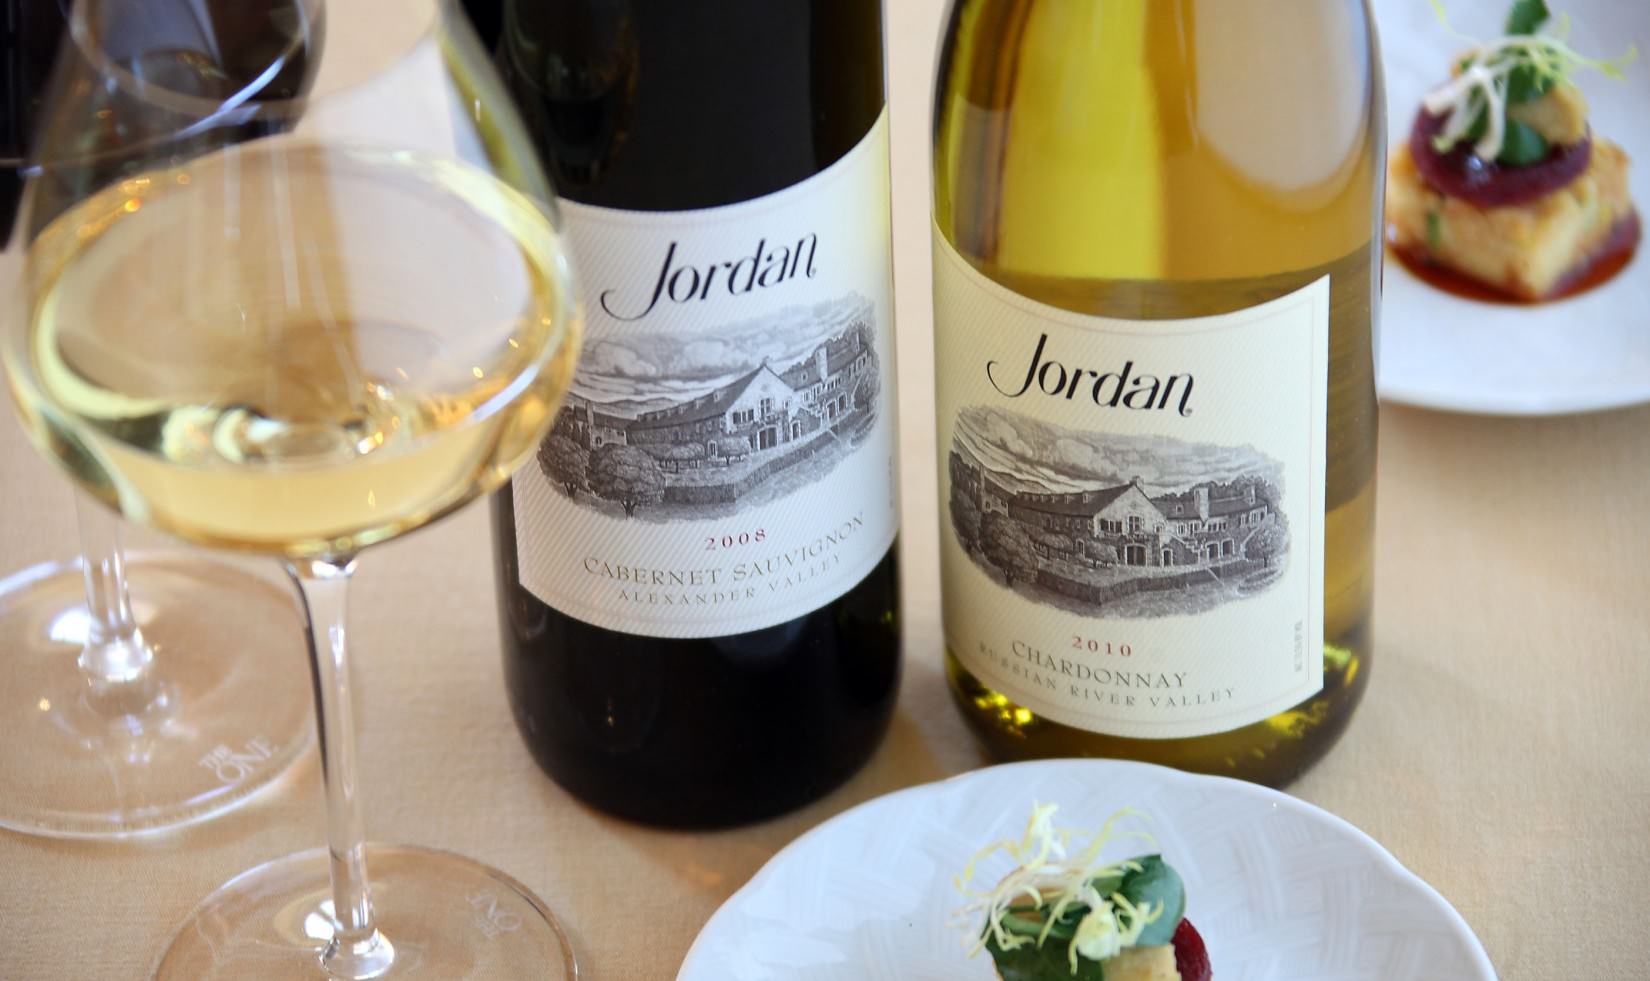 a bottle of 2008 Jordan Winery Cabernet and a bottle of 2010 Jordan Winery Chardonnay next to a poured glass of Chardonnay and small appetizers on small plates